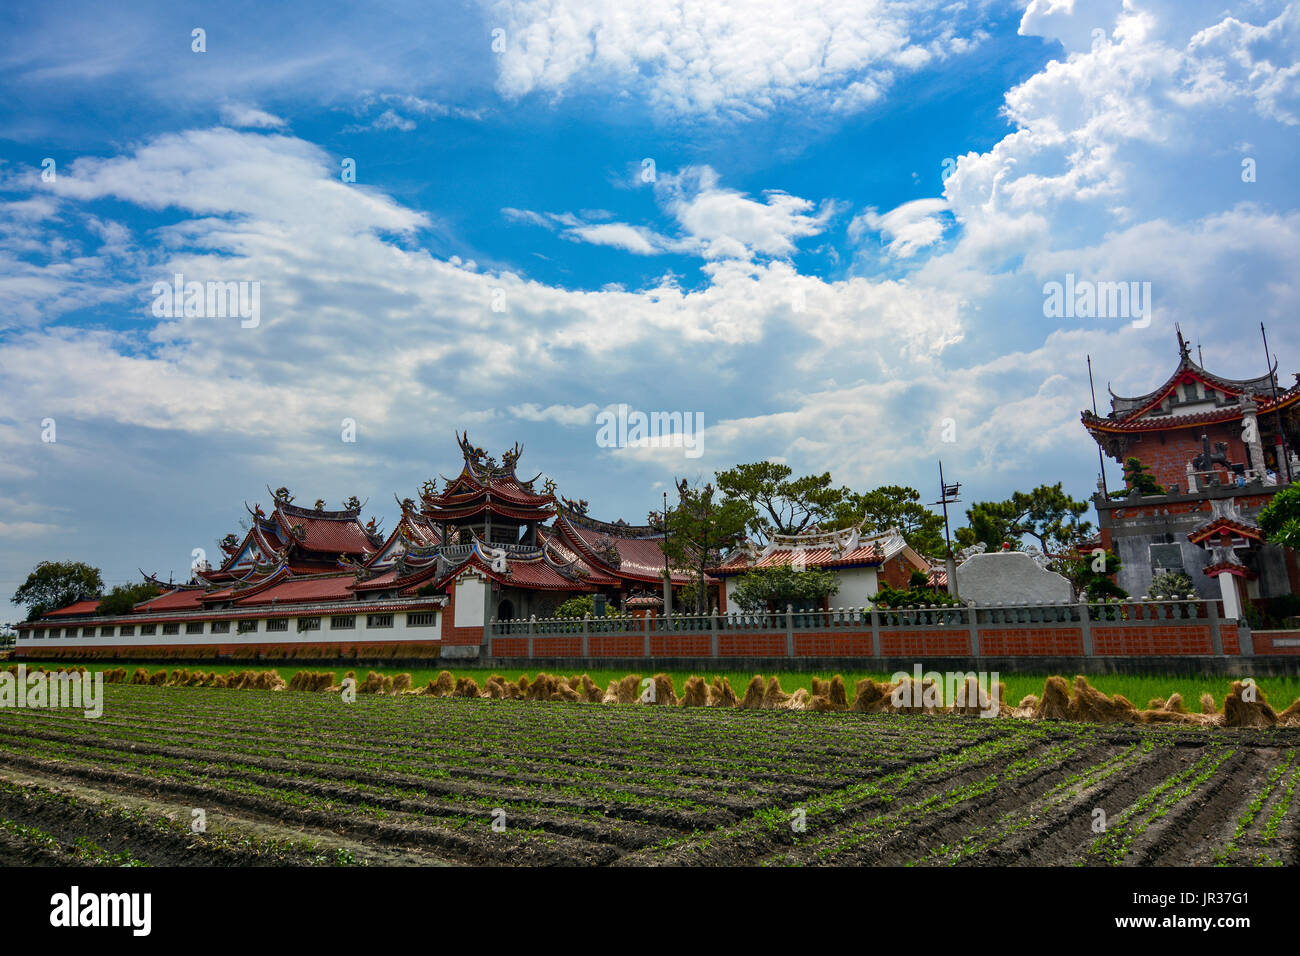 Newly planted farmland and Chinese style rooftops of the old Huwei Chifa Matsu Temple in Yunlin County, Taiwan Stock Photo